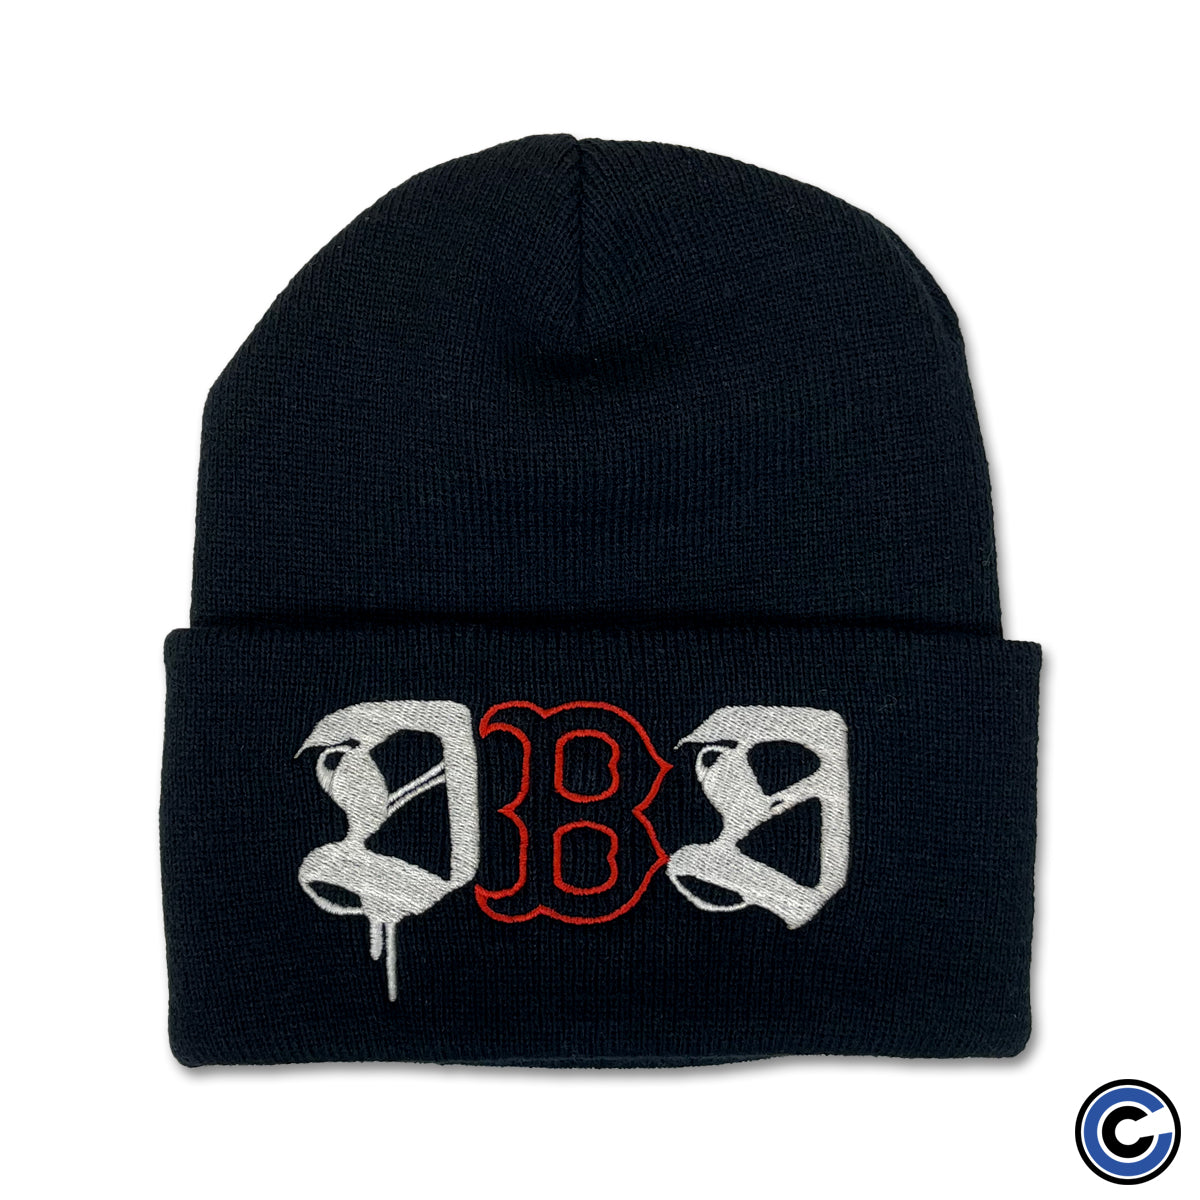 Death Before Dishonor "Old Boston" Beanie